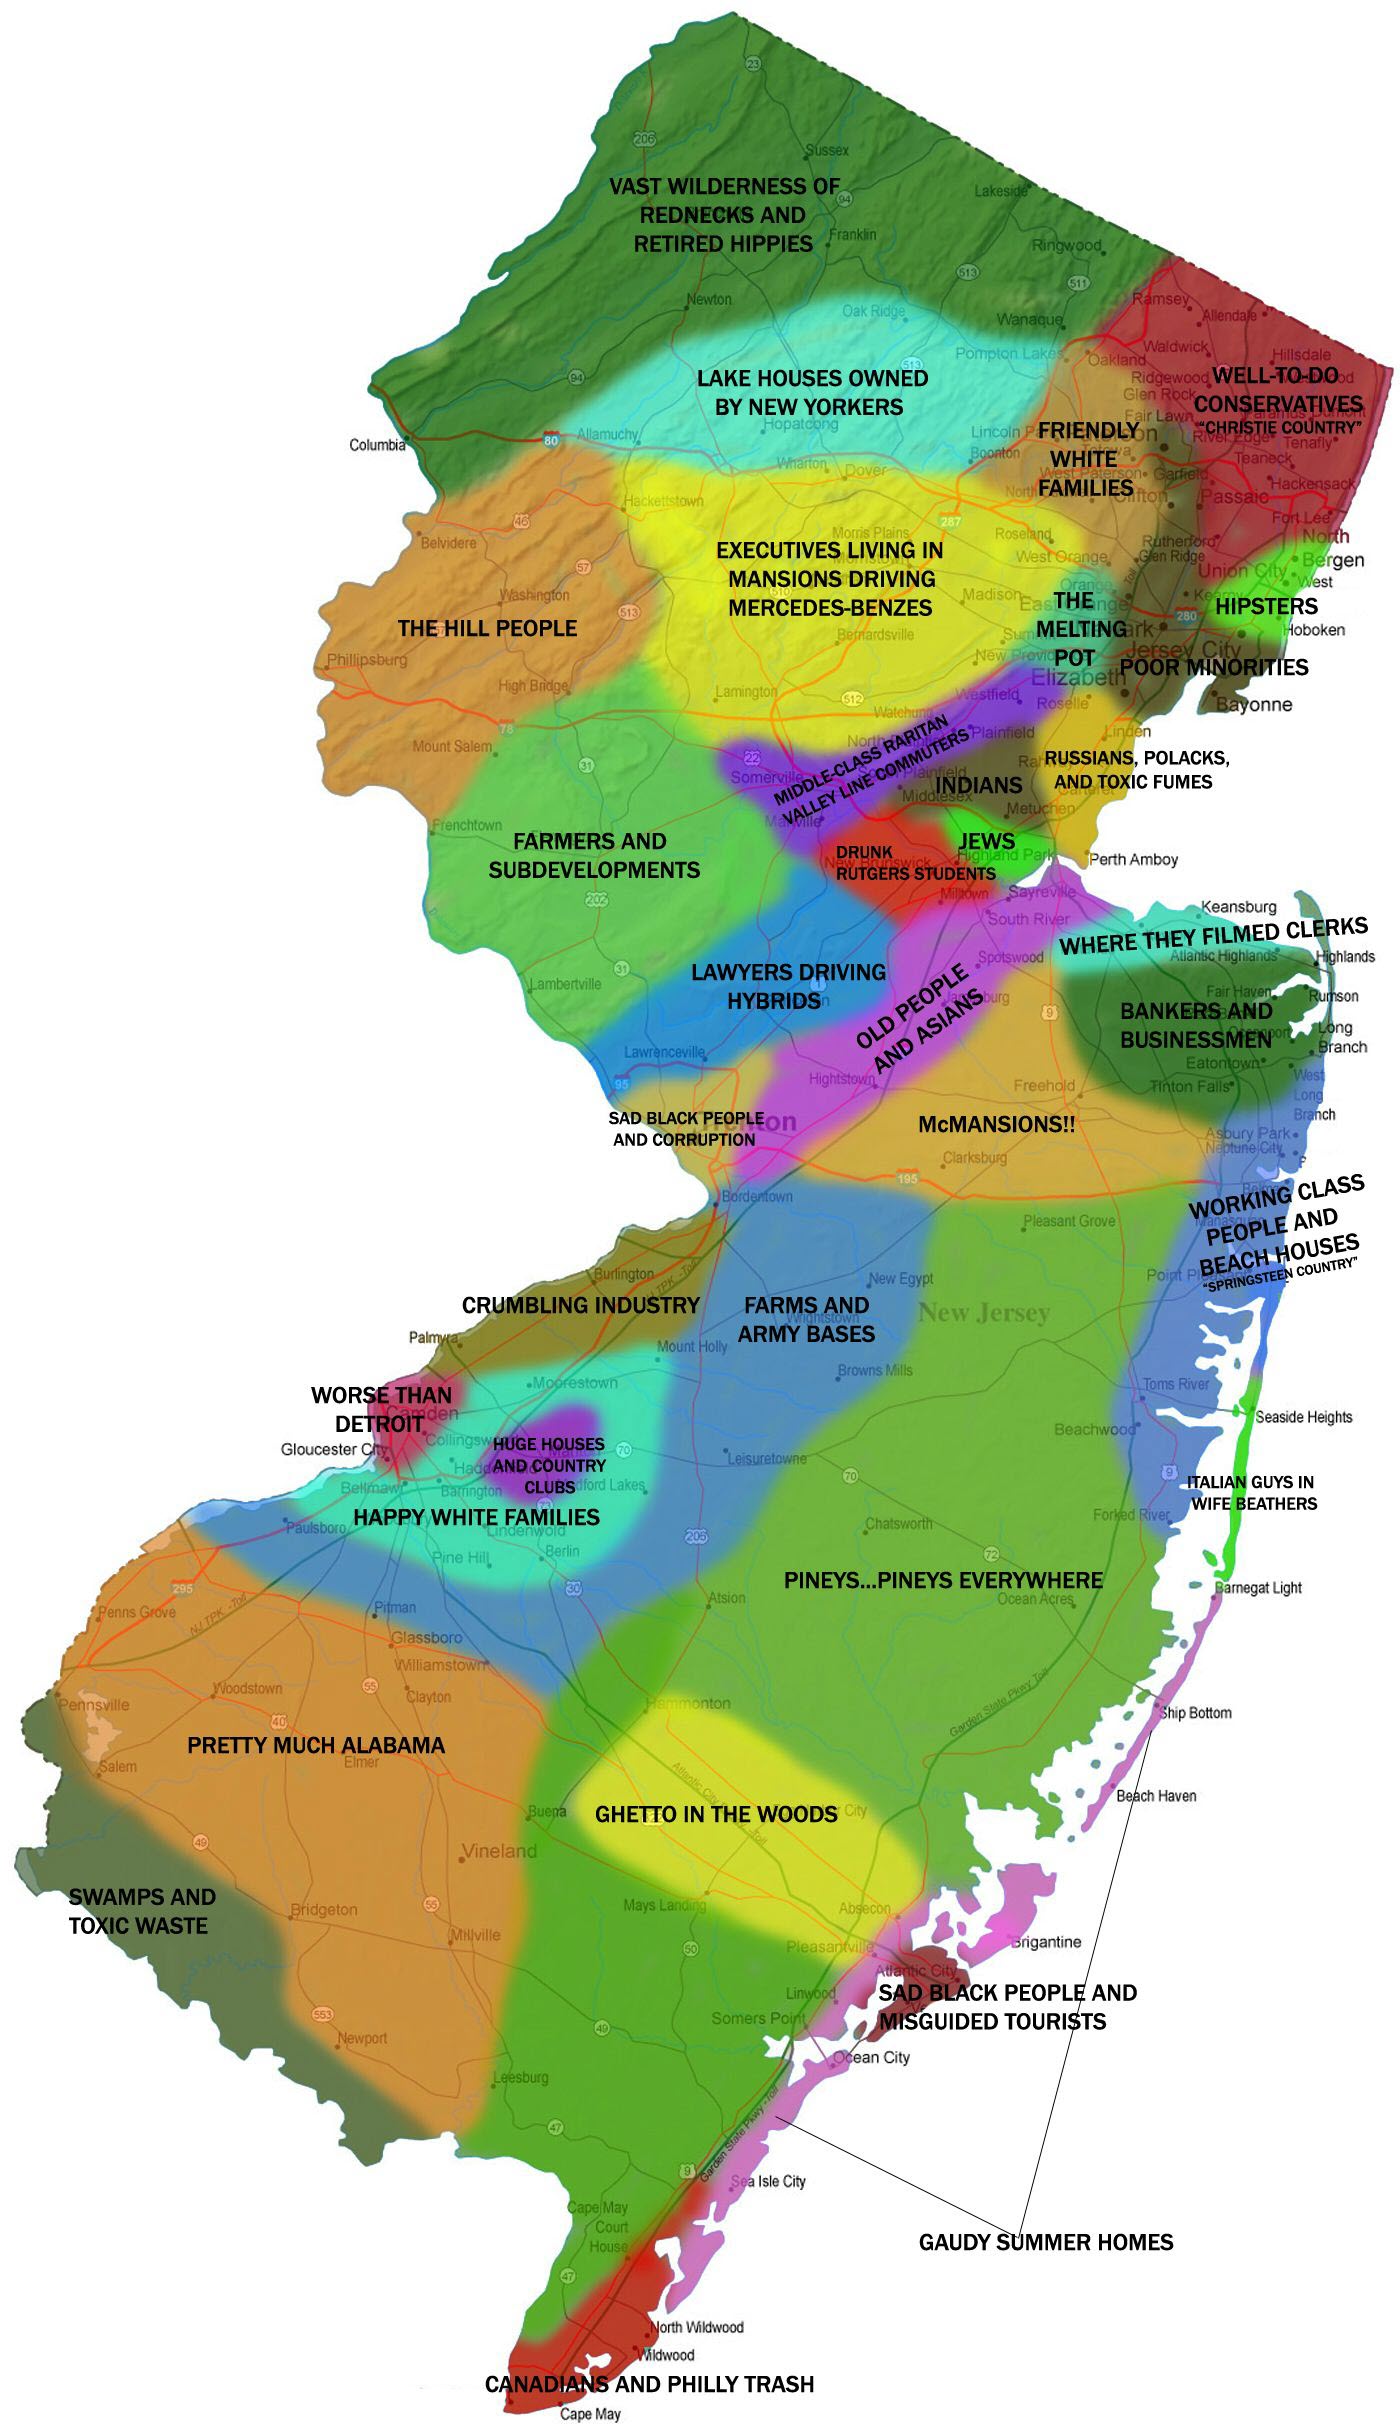 funny-new-jersey-area-map.jpg